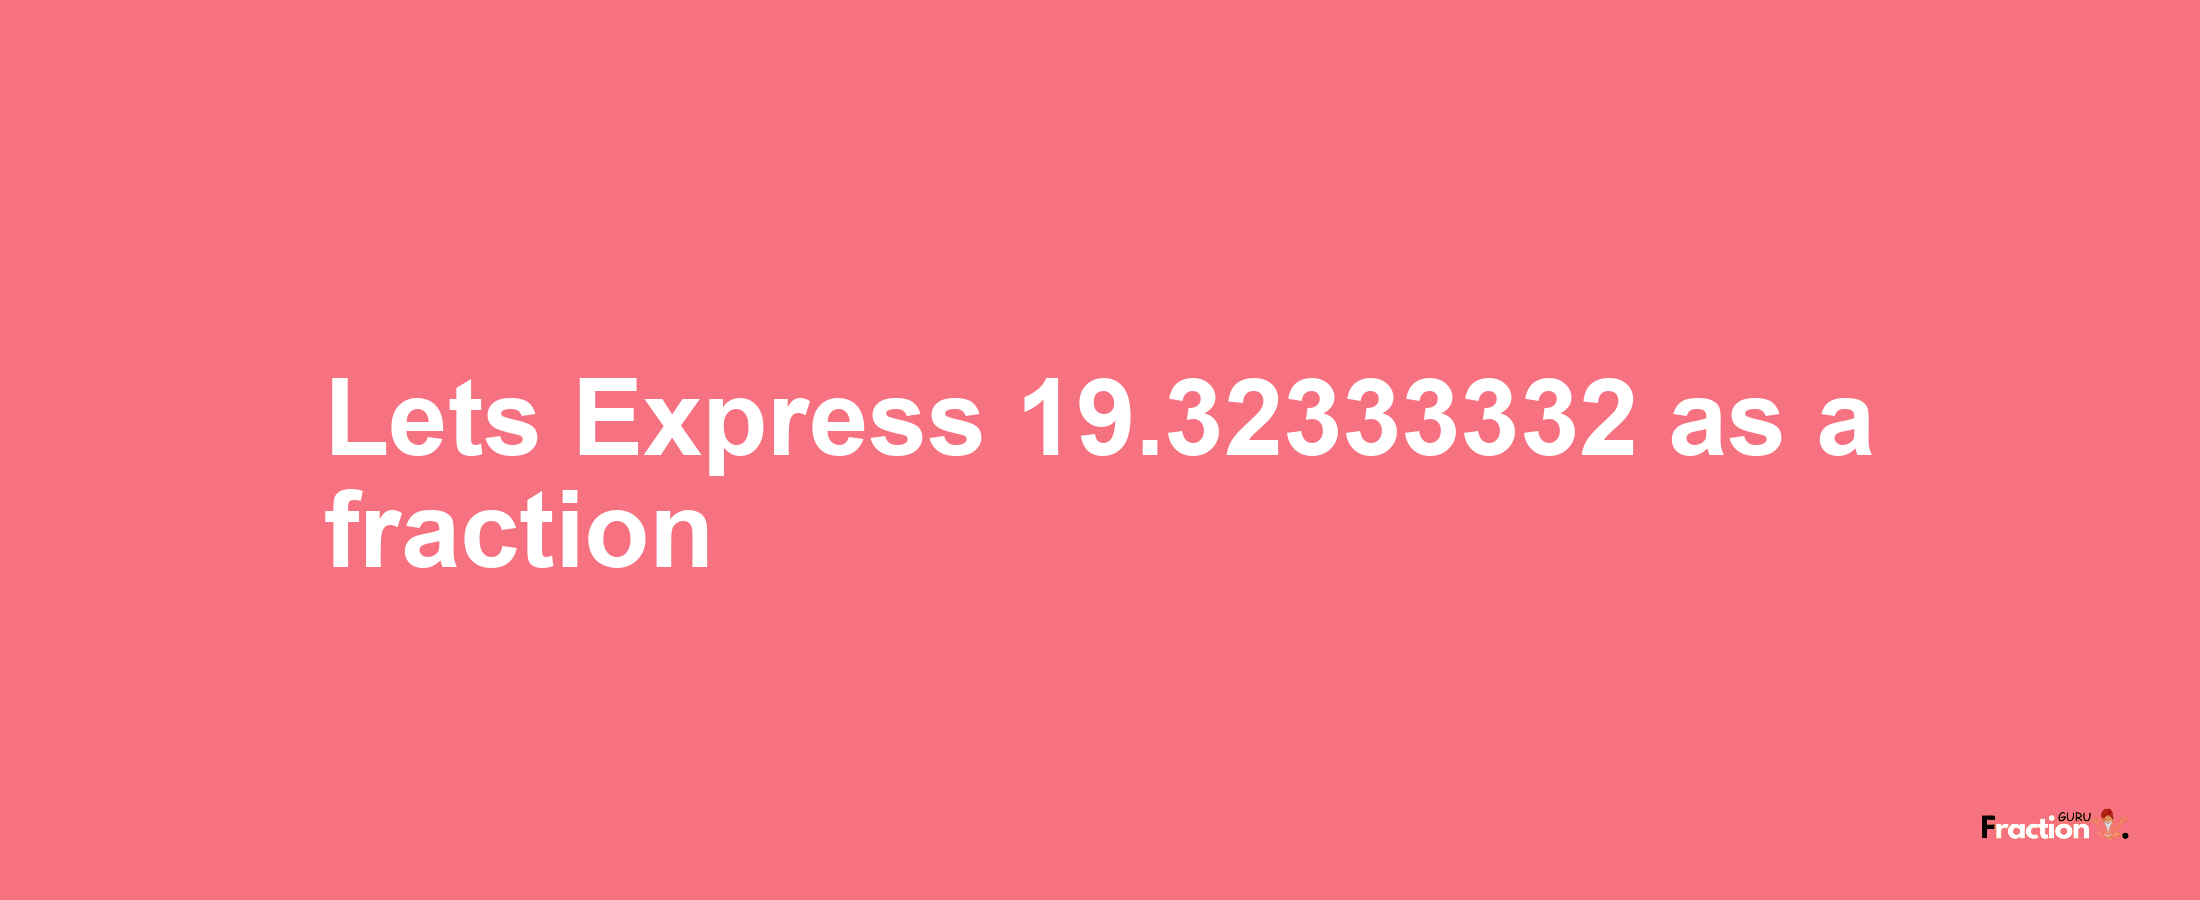 Lets Express 19.32333332 as afraction